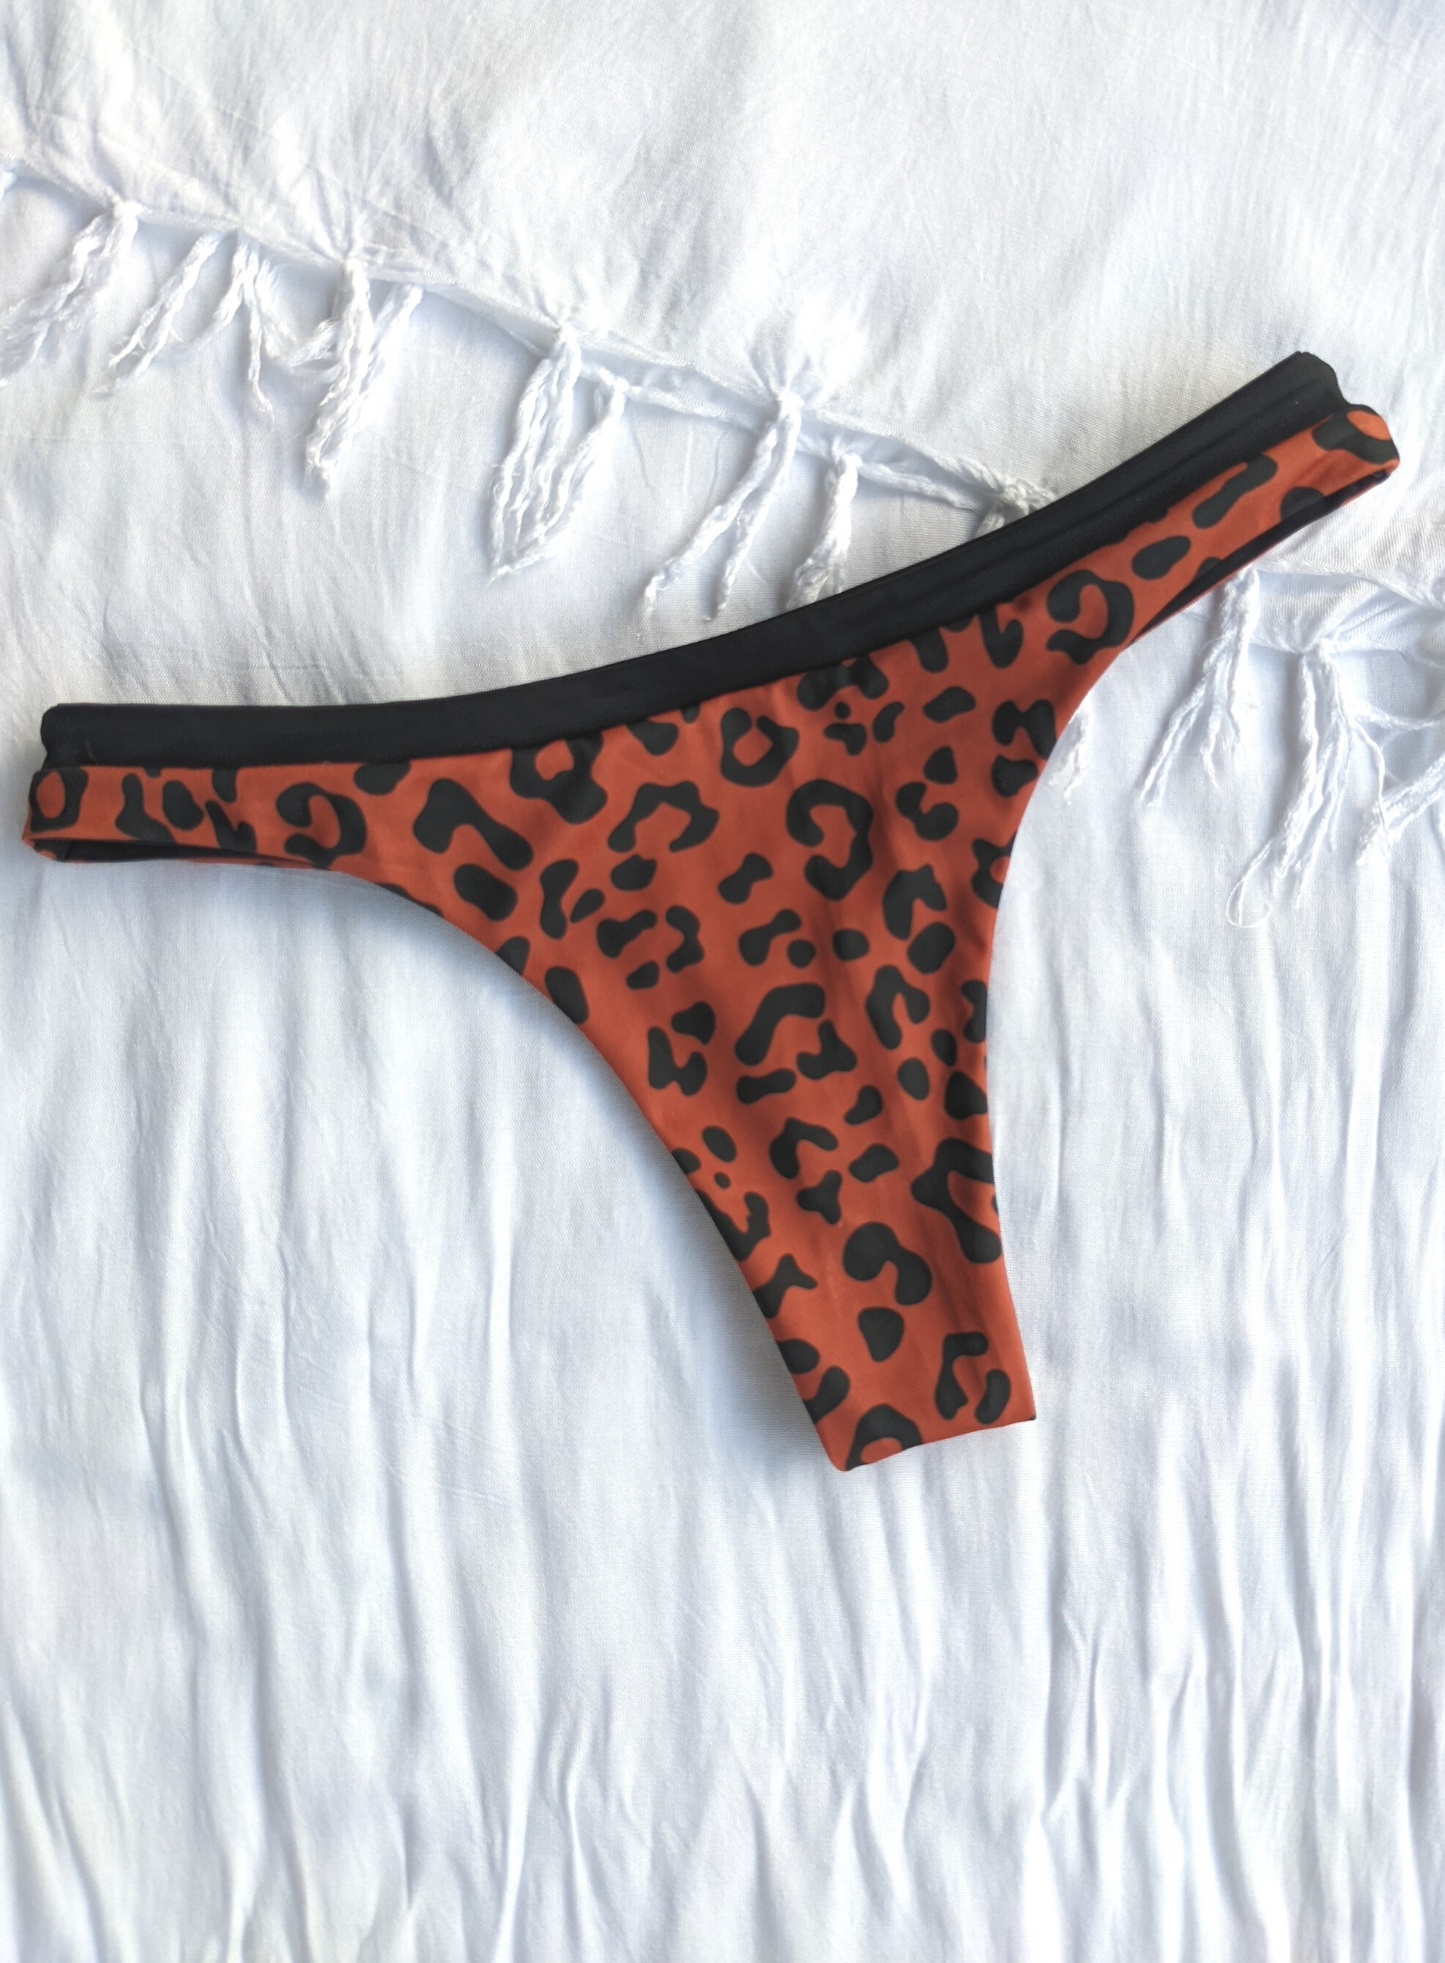 Reversible Black and Leopard Print Skimpy Cut Bikini Bottom Made From Eco Friendly Recycled Regenerated Nylon Fabric Leopard Print Front Flat Lay View